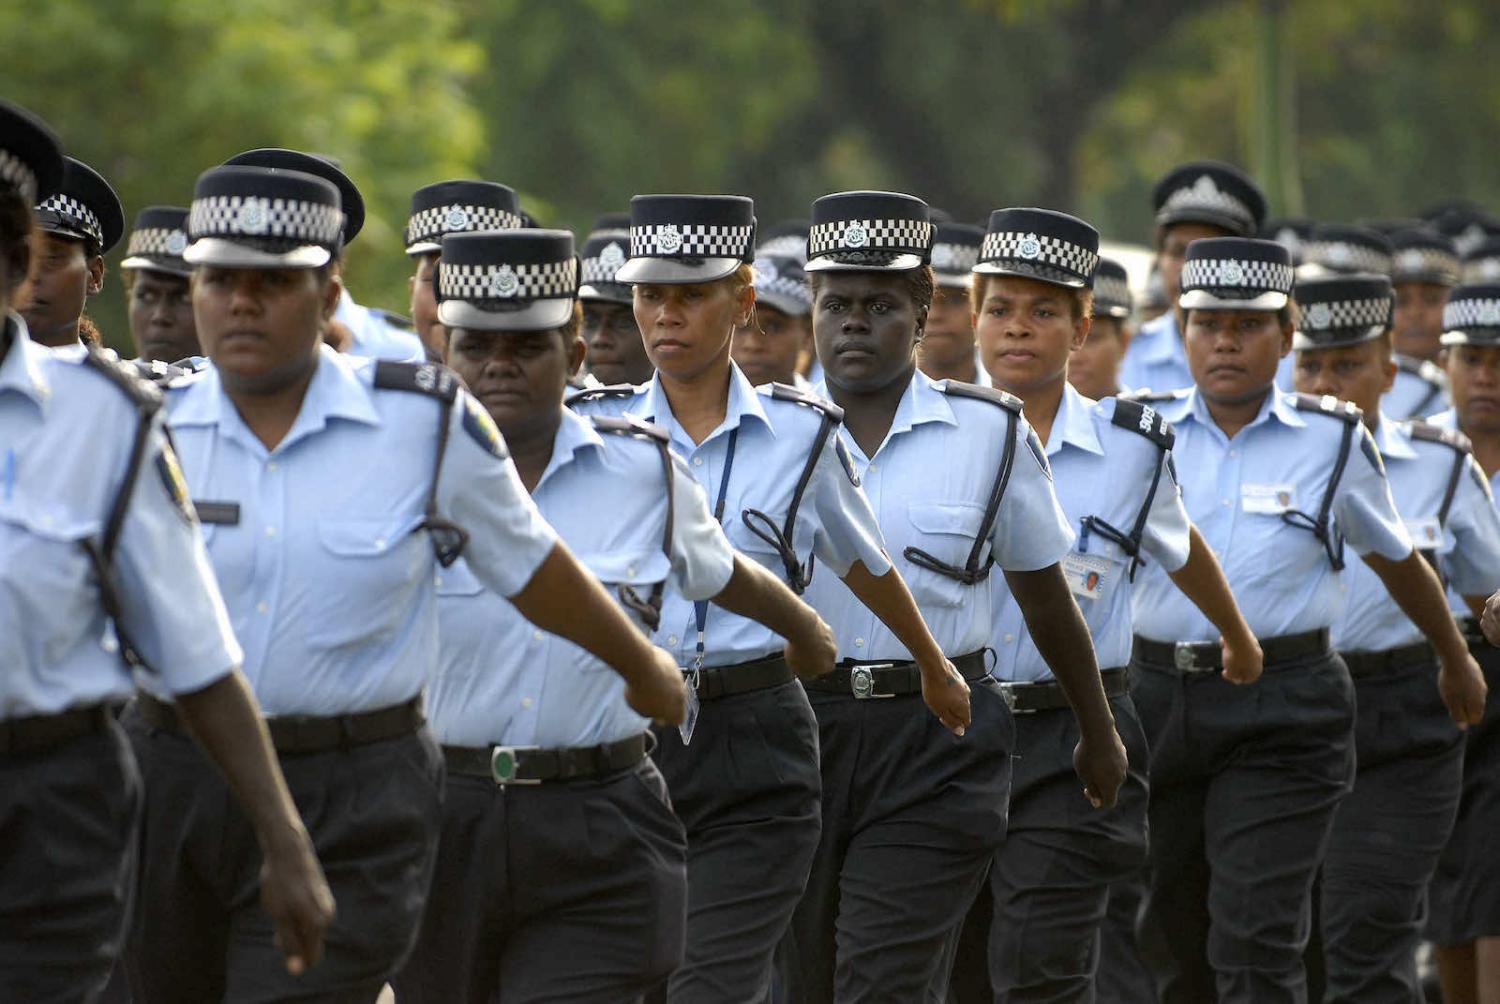 Royal Solomon Islands Police Force female officers during a 2010 International Women’s Day parade (DFAT/Flickr)